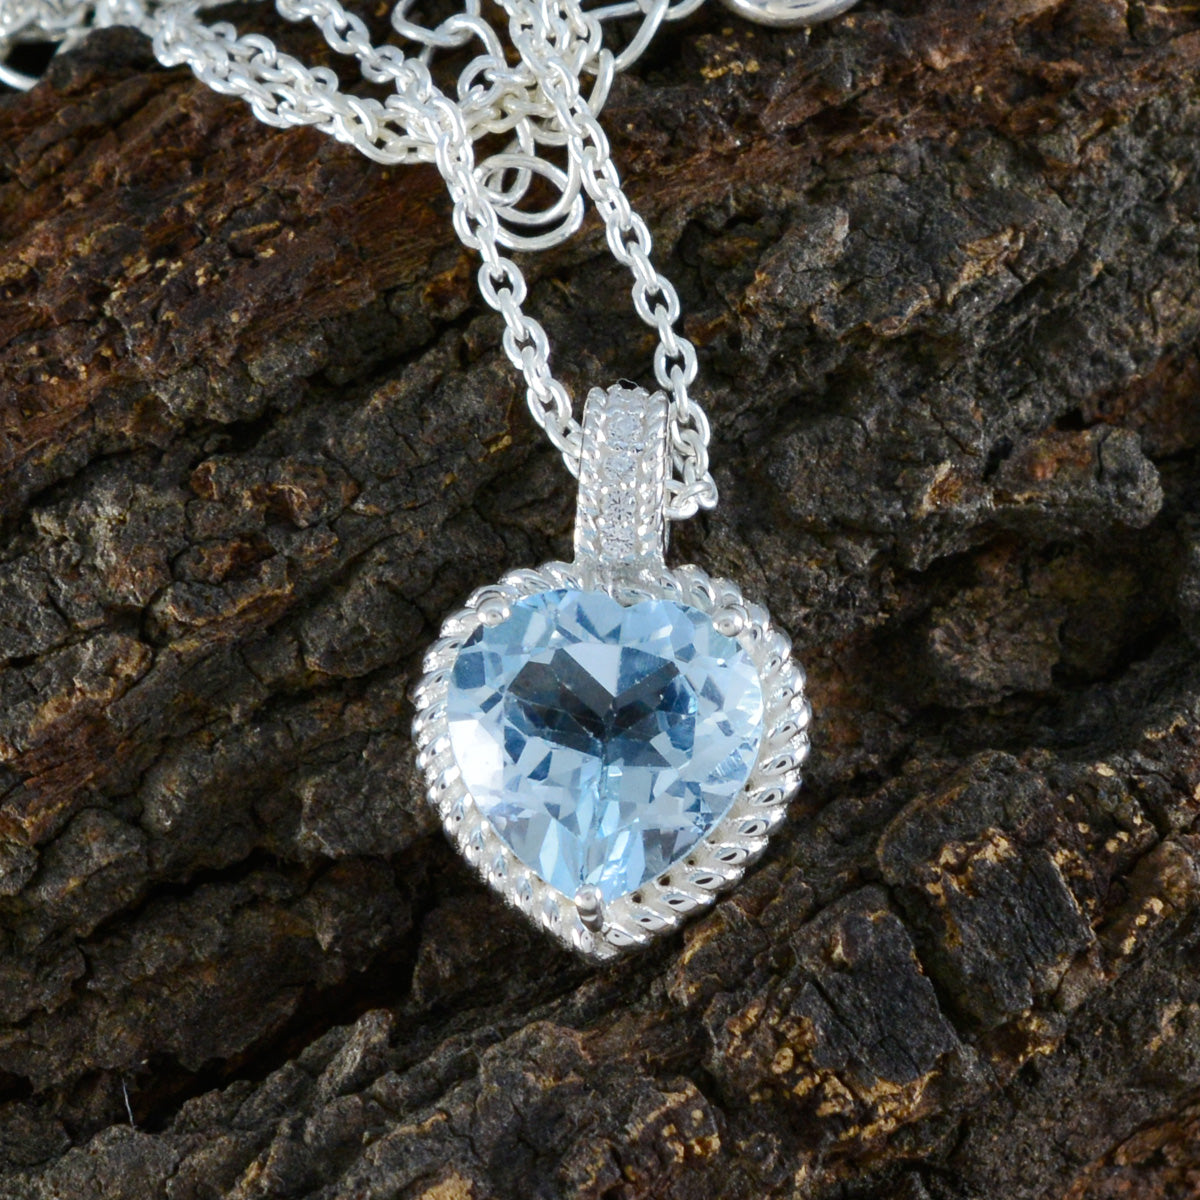 Riyo Nice Gems Heart Faceted Blue Blue Topaz Solid Silver Pendant Gift For Easter Sunday